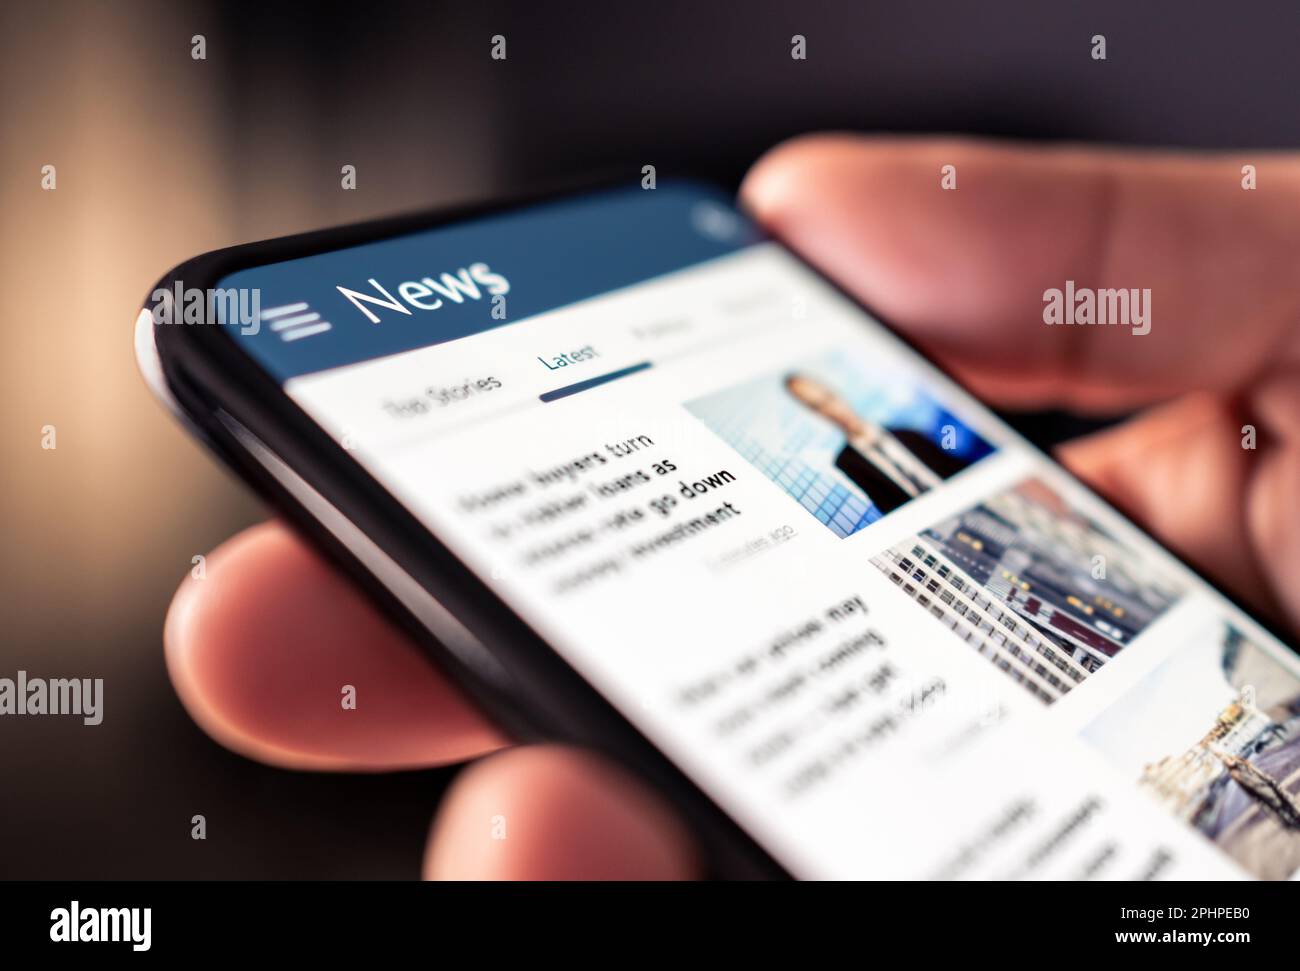 News online in phone. Reading newspaper from website. Digital publication and magazine mockup. Press feed with latest headlines in digital web portal. Stock Photo